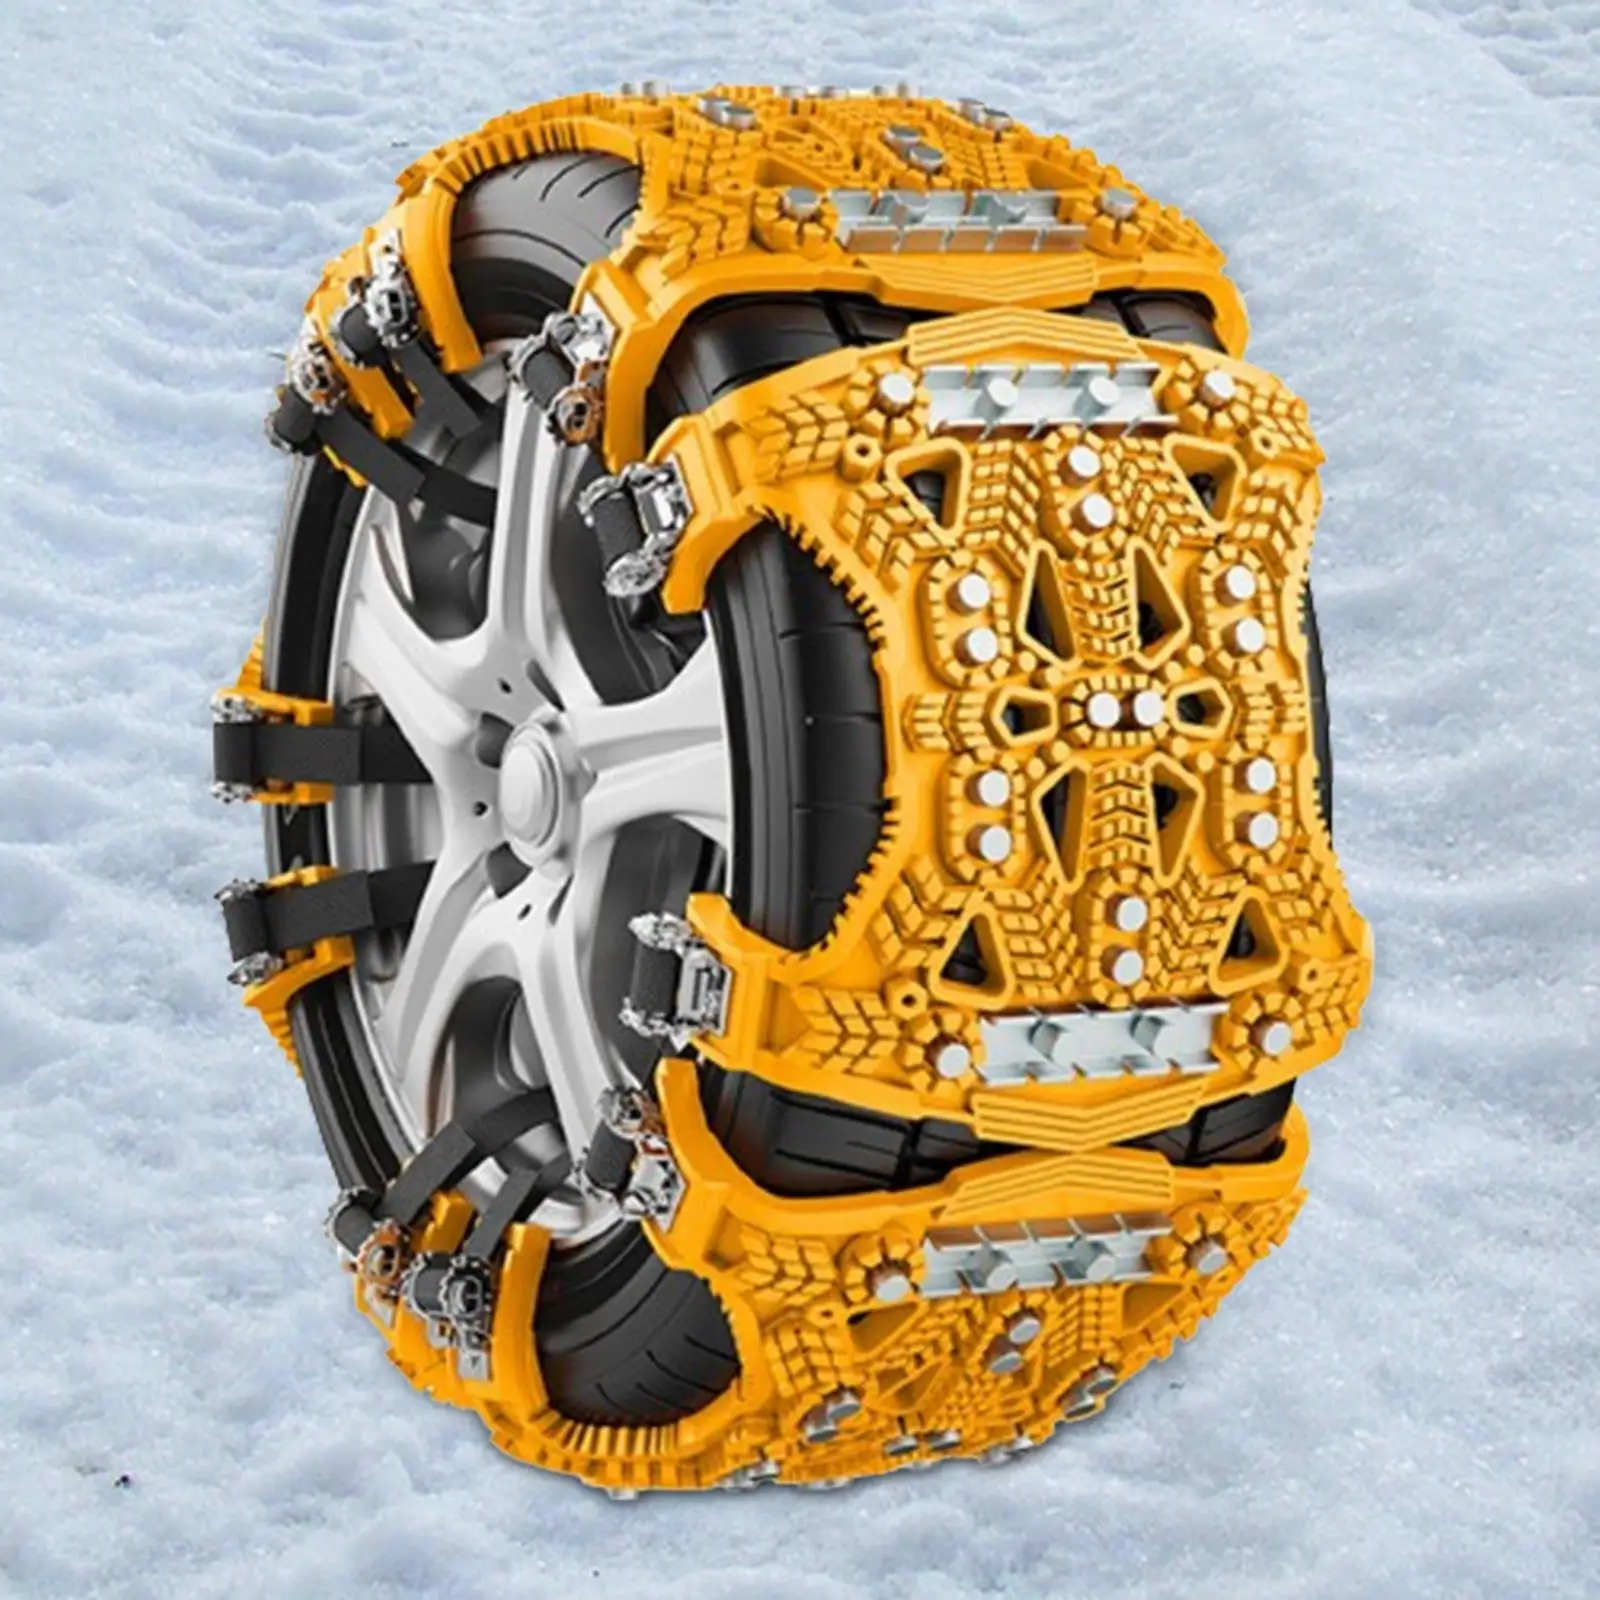 Car Tyres Anti Slip Snow Chain Emergency Accessory for Mud Road Durable